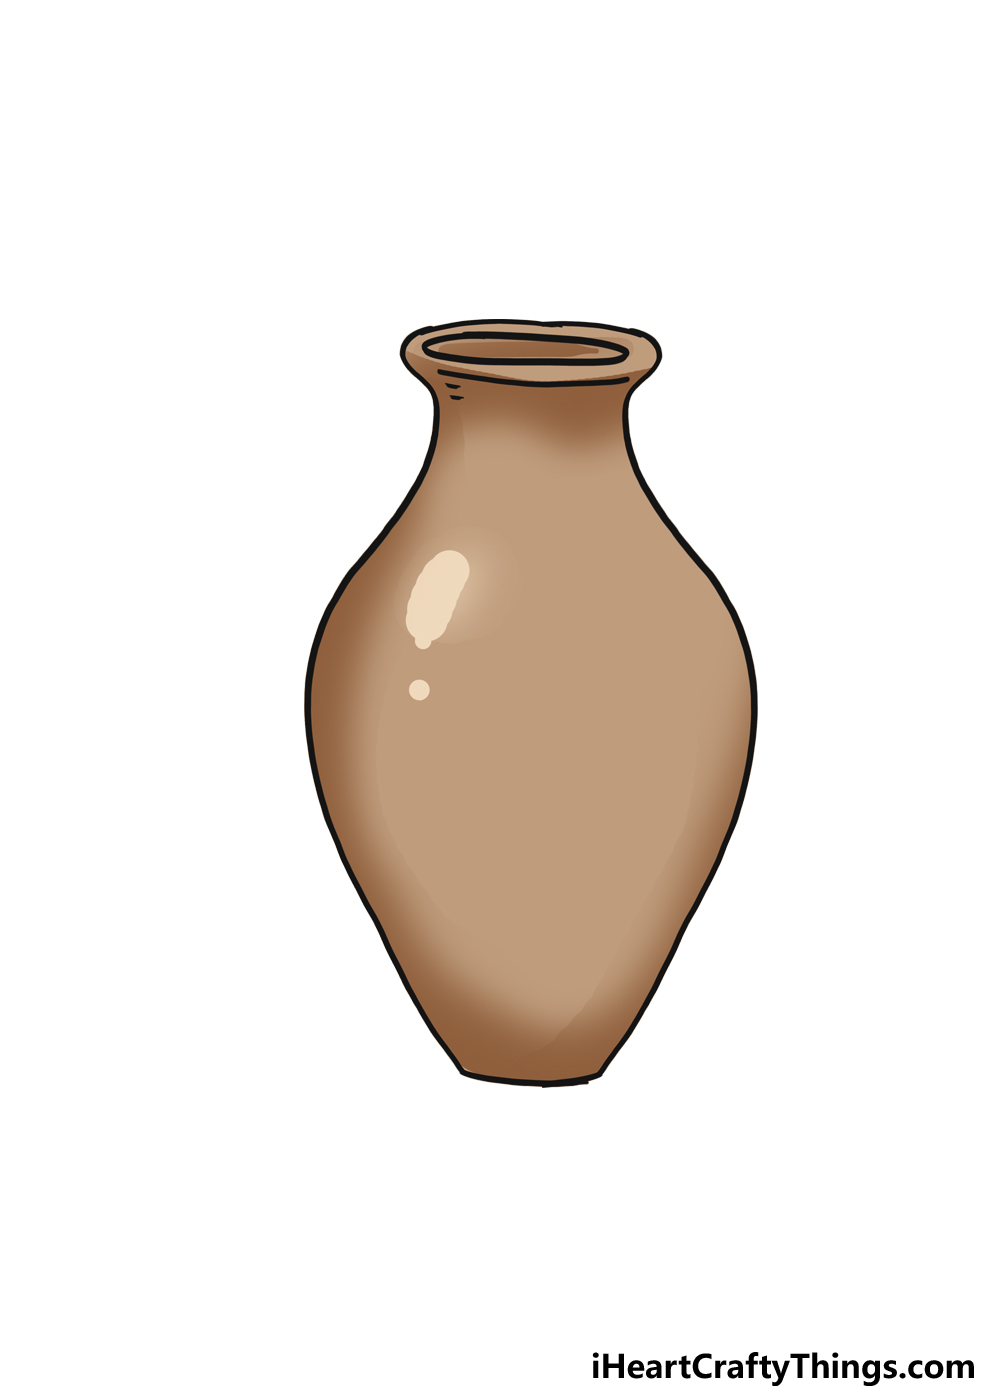 How to Draw A Flower Vase step 6